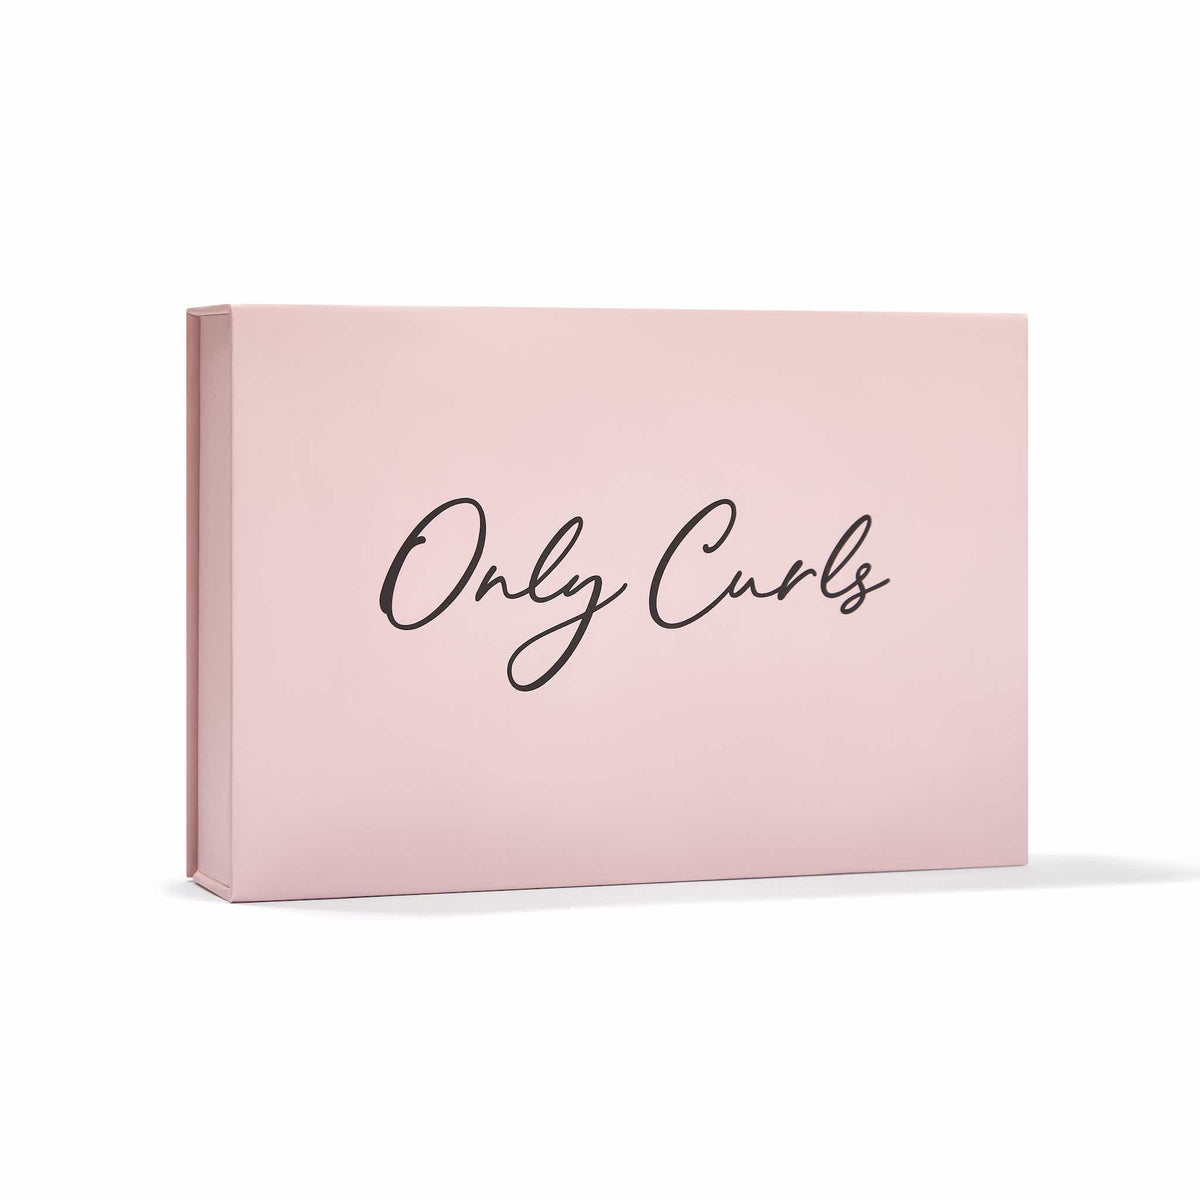 Only Curls Silk Pillowcase - White - Only Curls